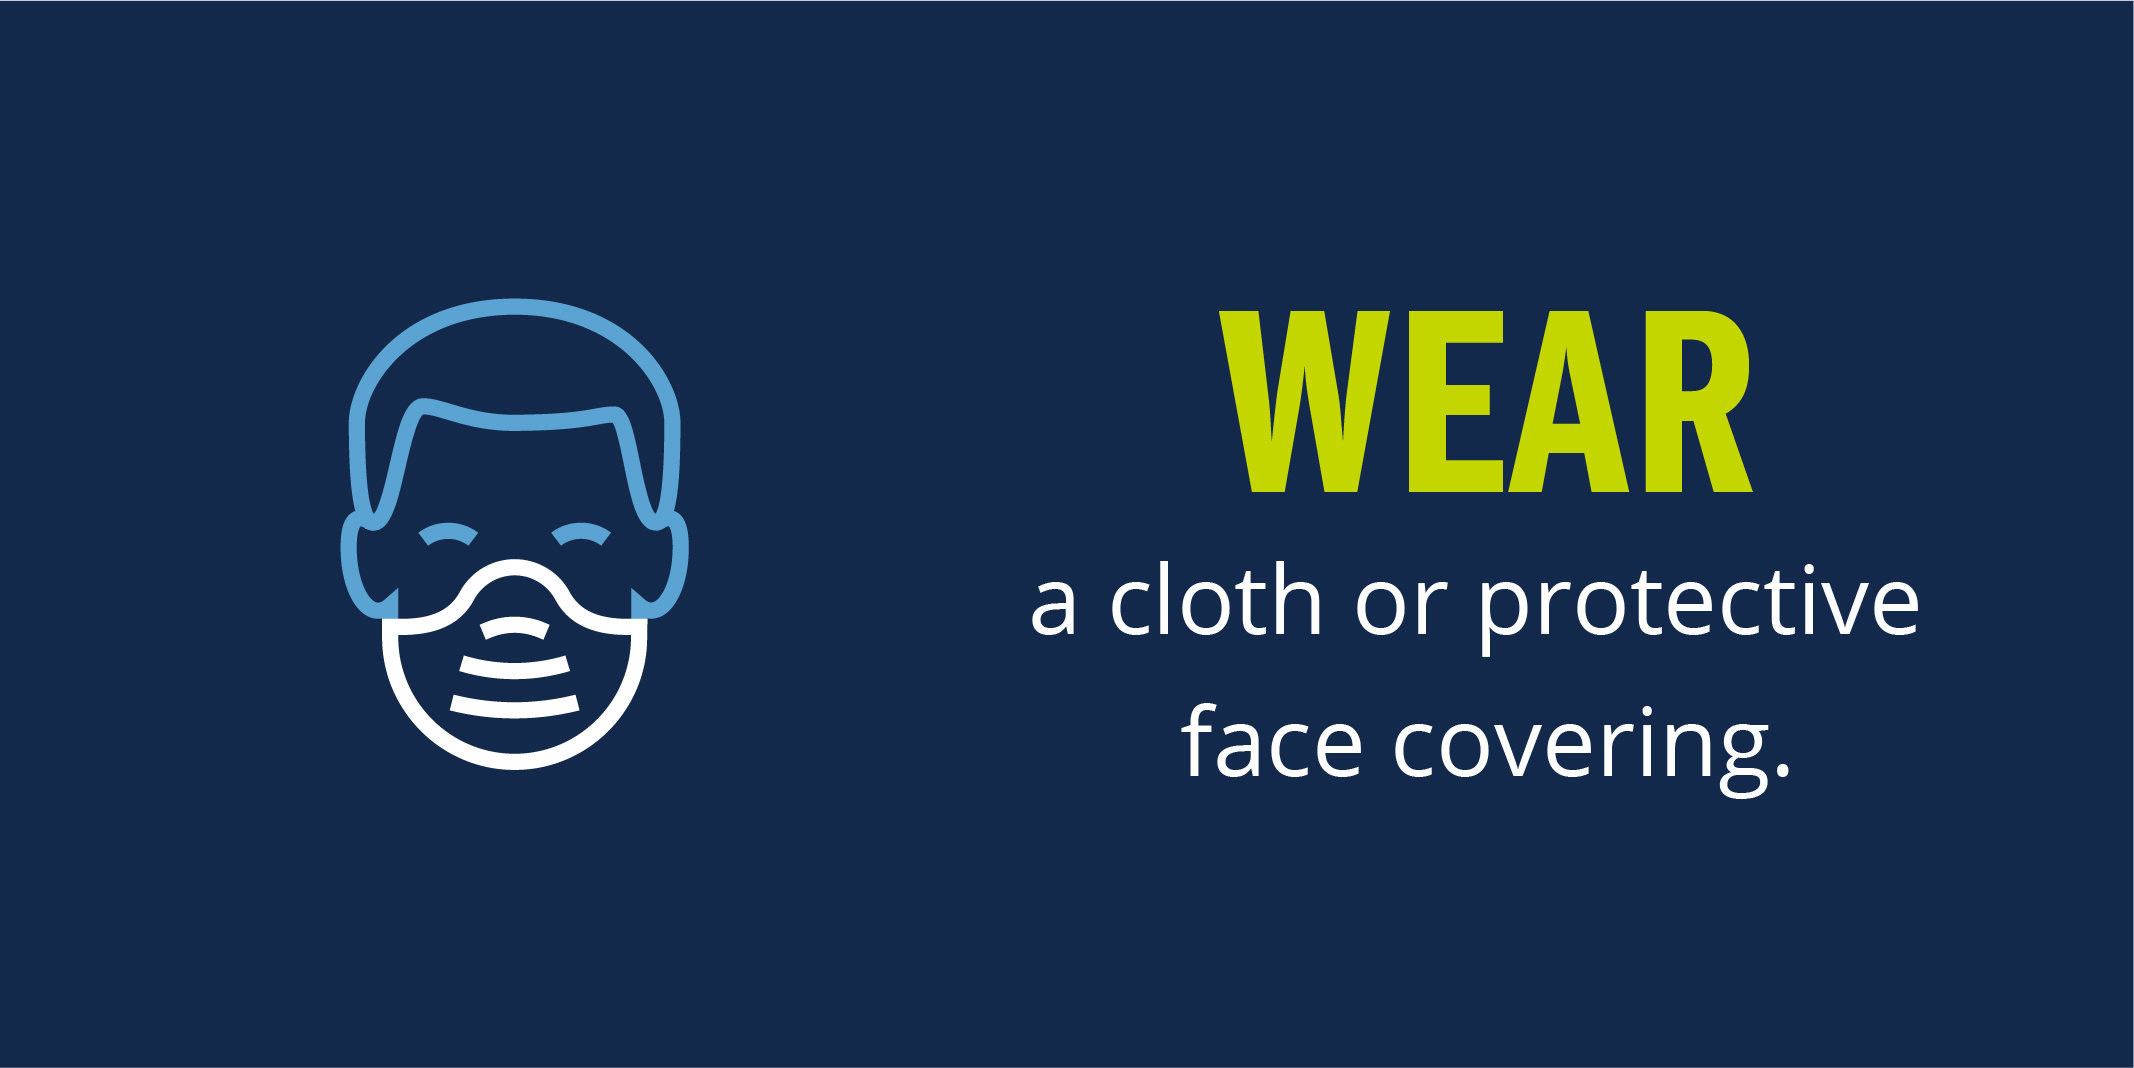 Graphic of person wearing a mask with text: wear a cloth or protective face covering.